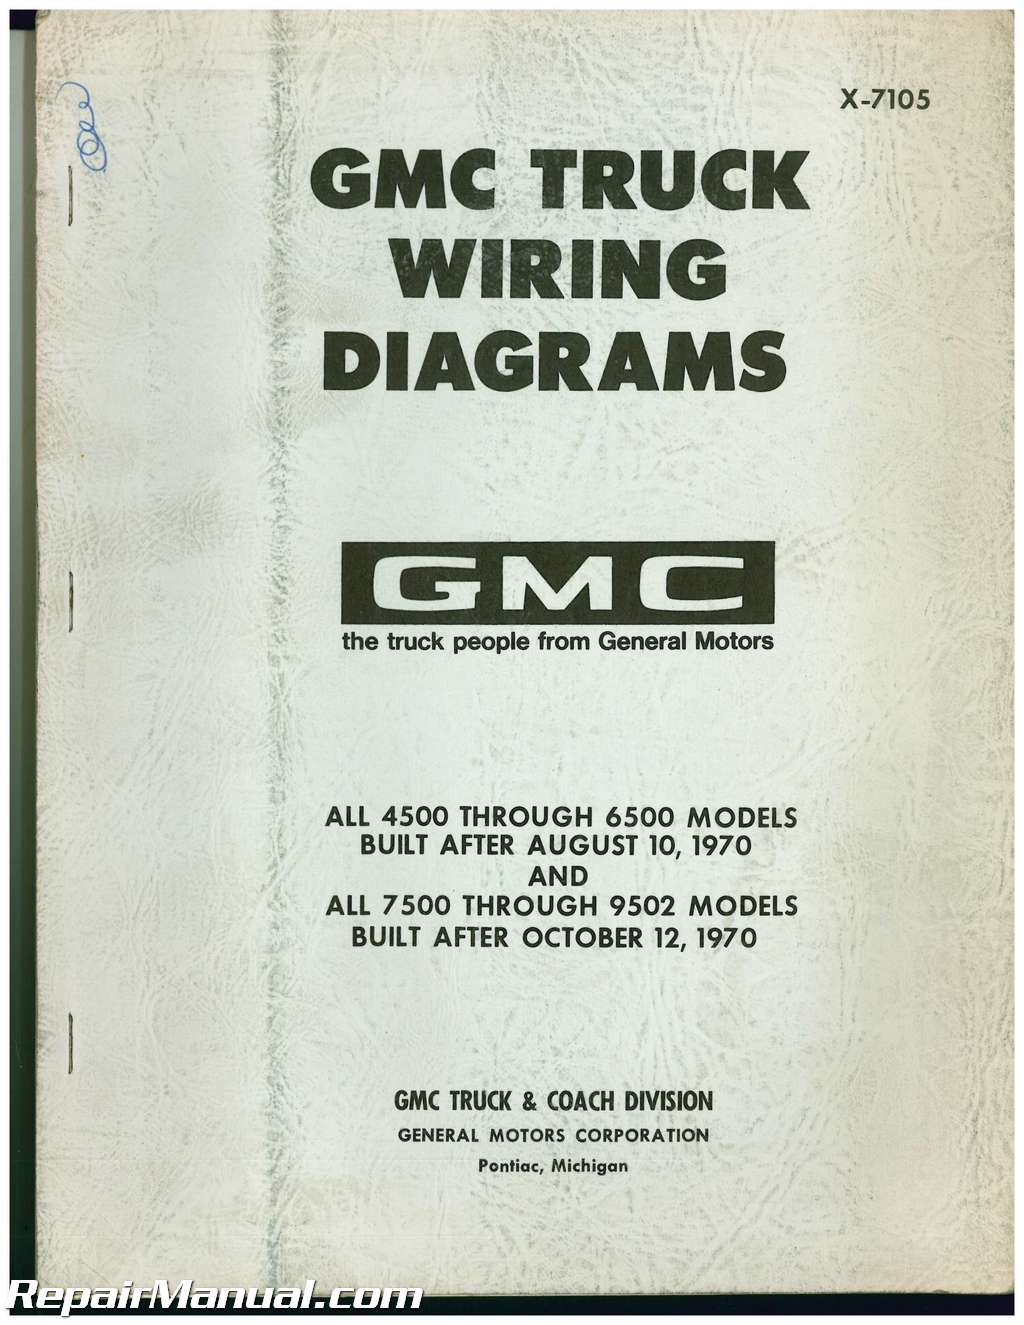 Used 1971 Gmc Truck Wiring Diagrams